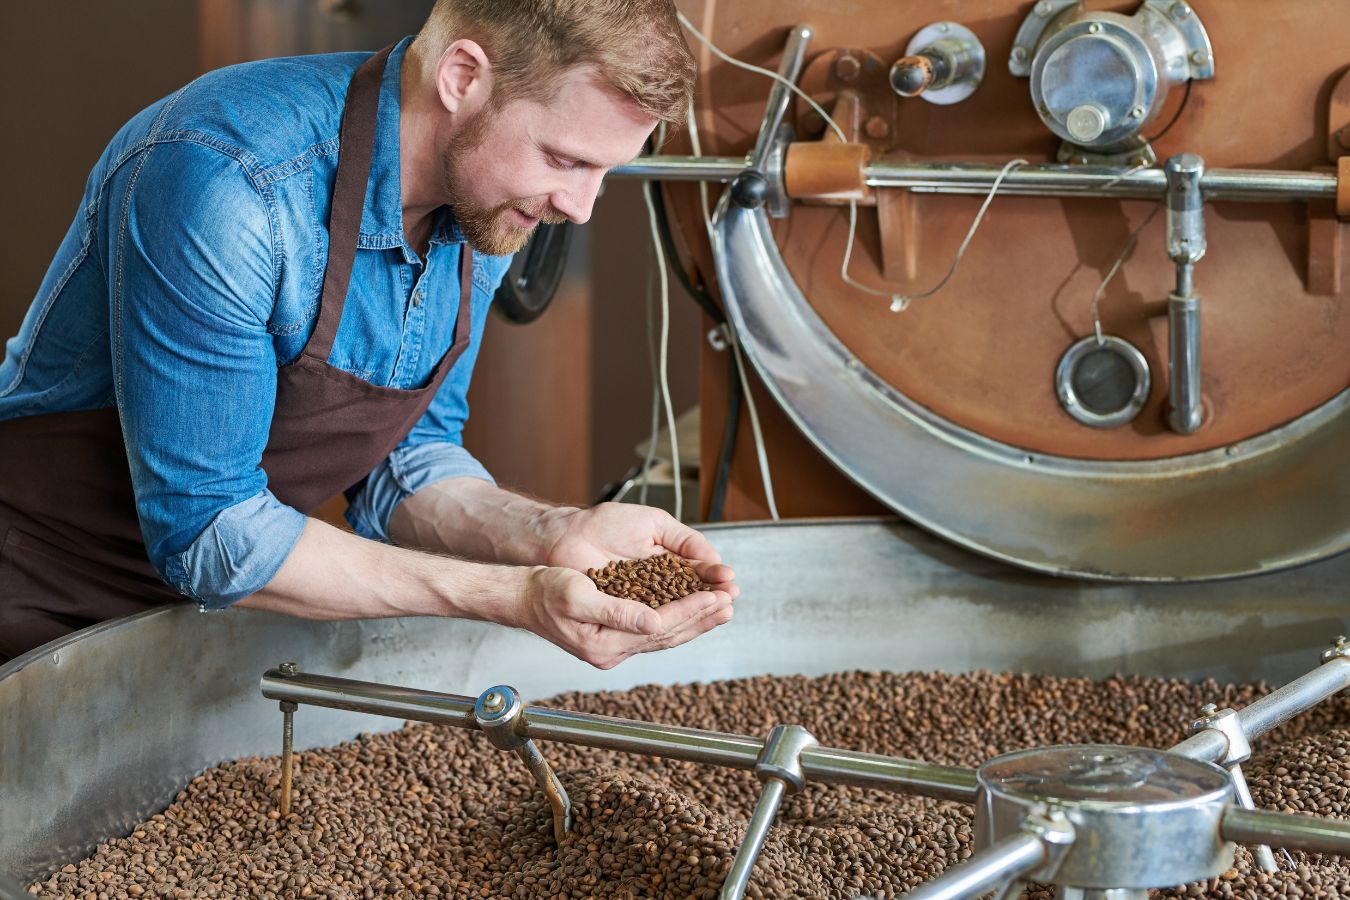 What Happens During The Roasting Process Of Coffee?